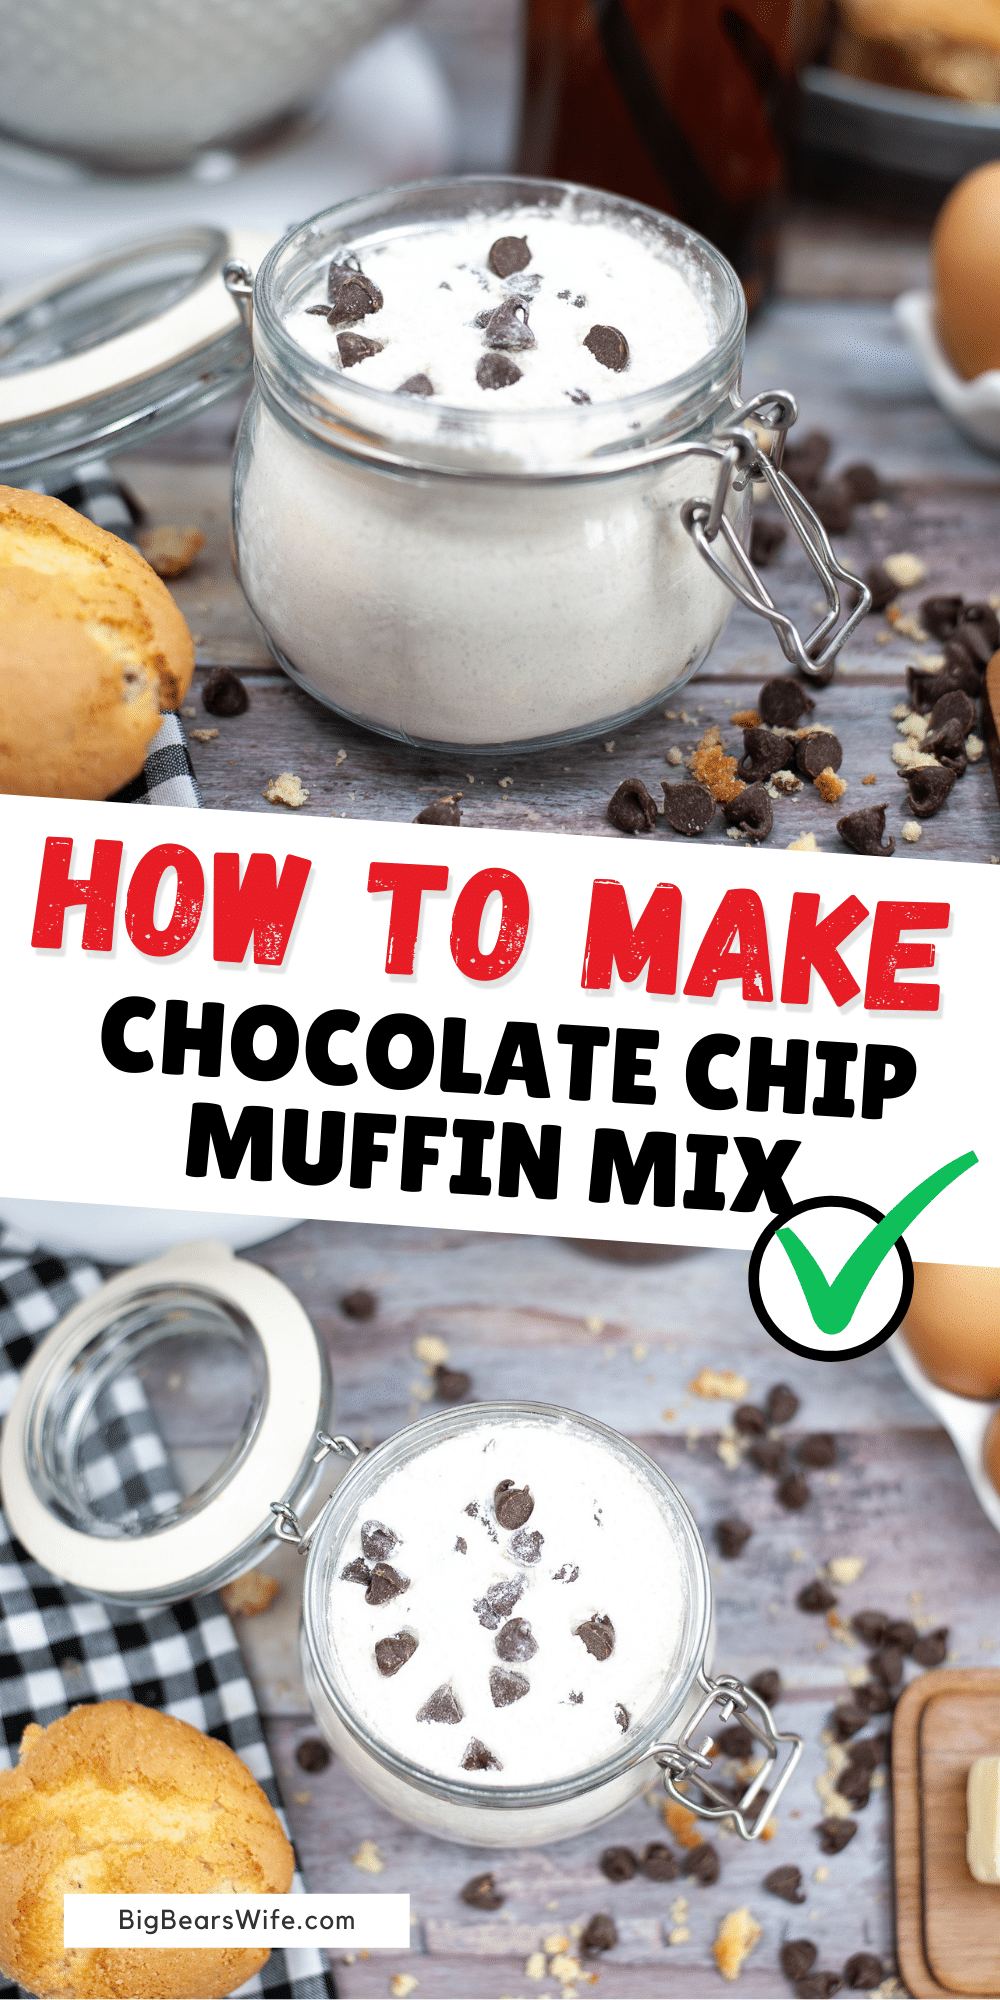 Chocolate Chip Muffin Mix - keep this homemade Chocolate Chip Muffin Mix in the pantry for when you're ready to make breakfast chocolate chip muffins or gift a jar of it with a sweet tag to a friend as a fun homemade gift!  via @bigbearswife